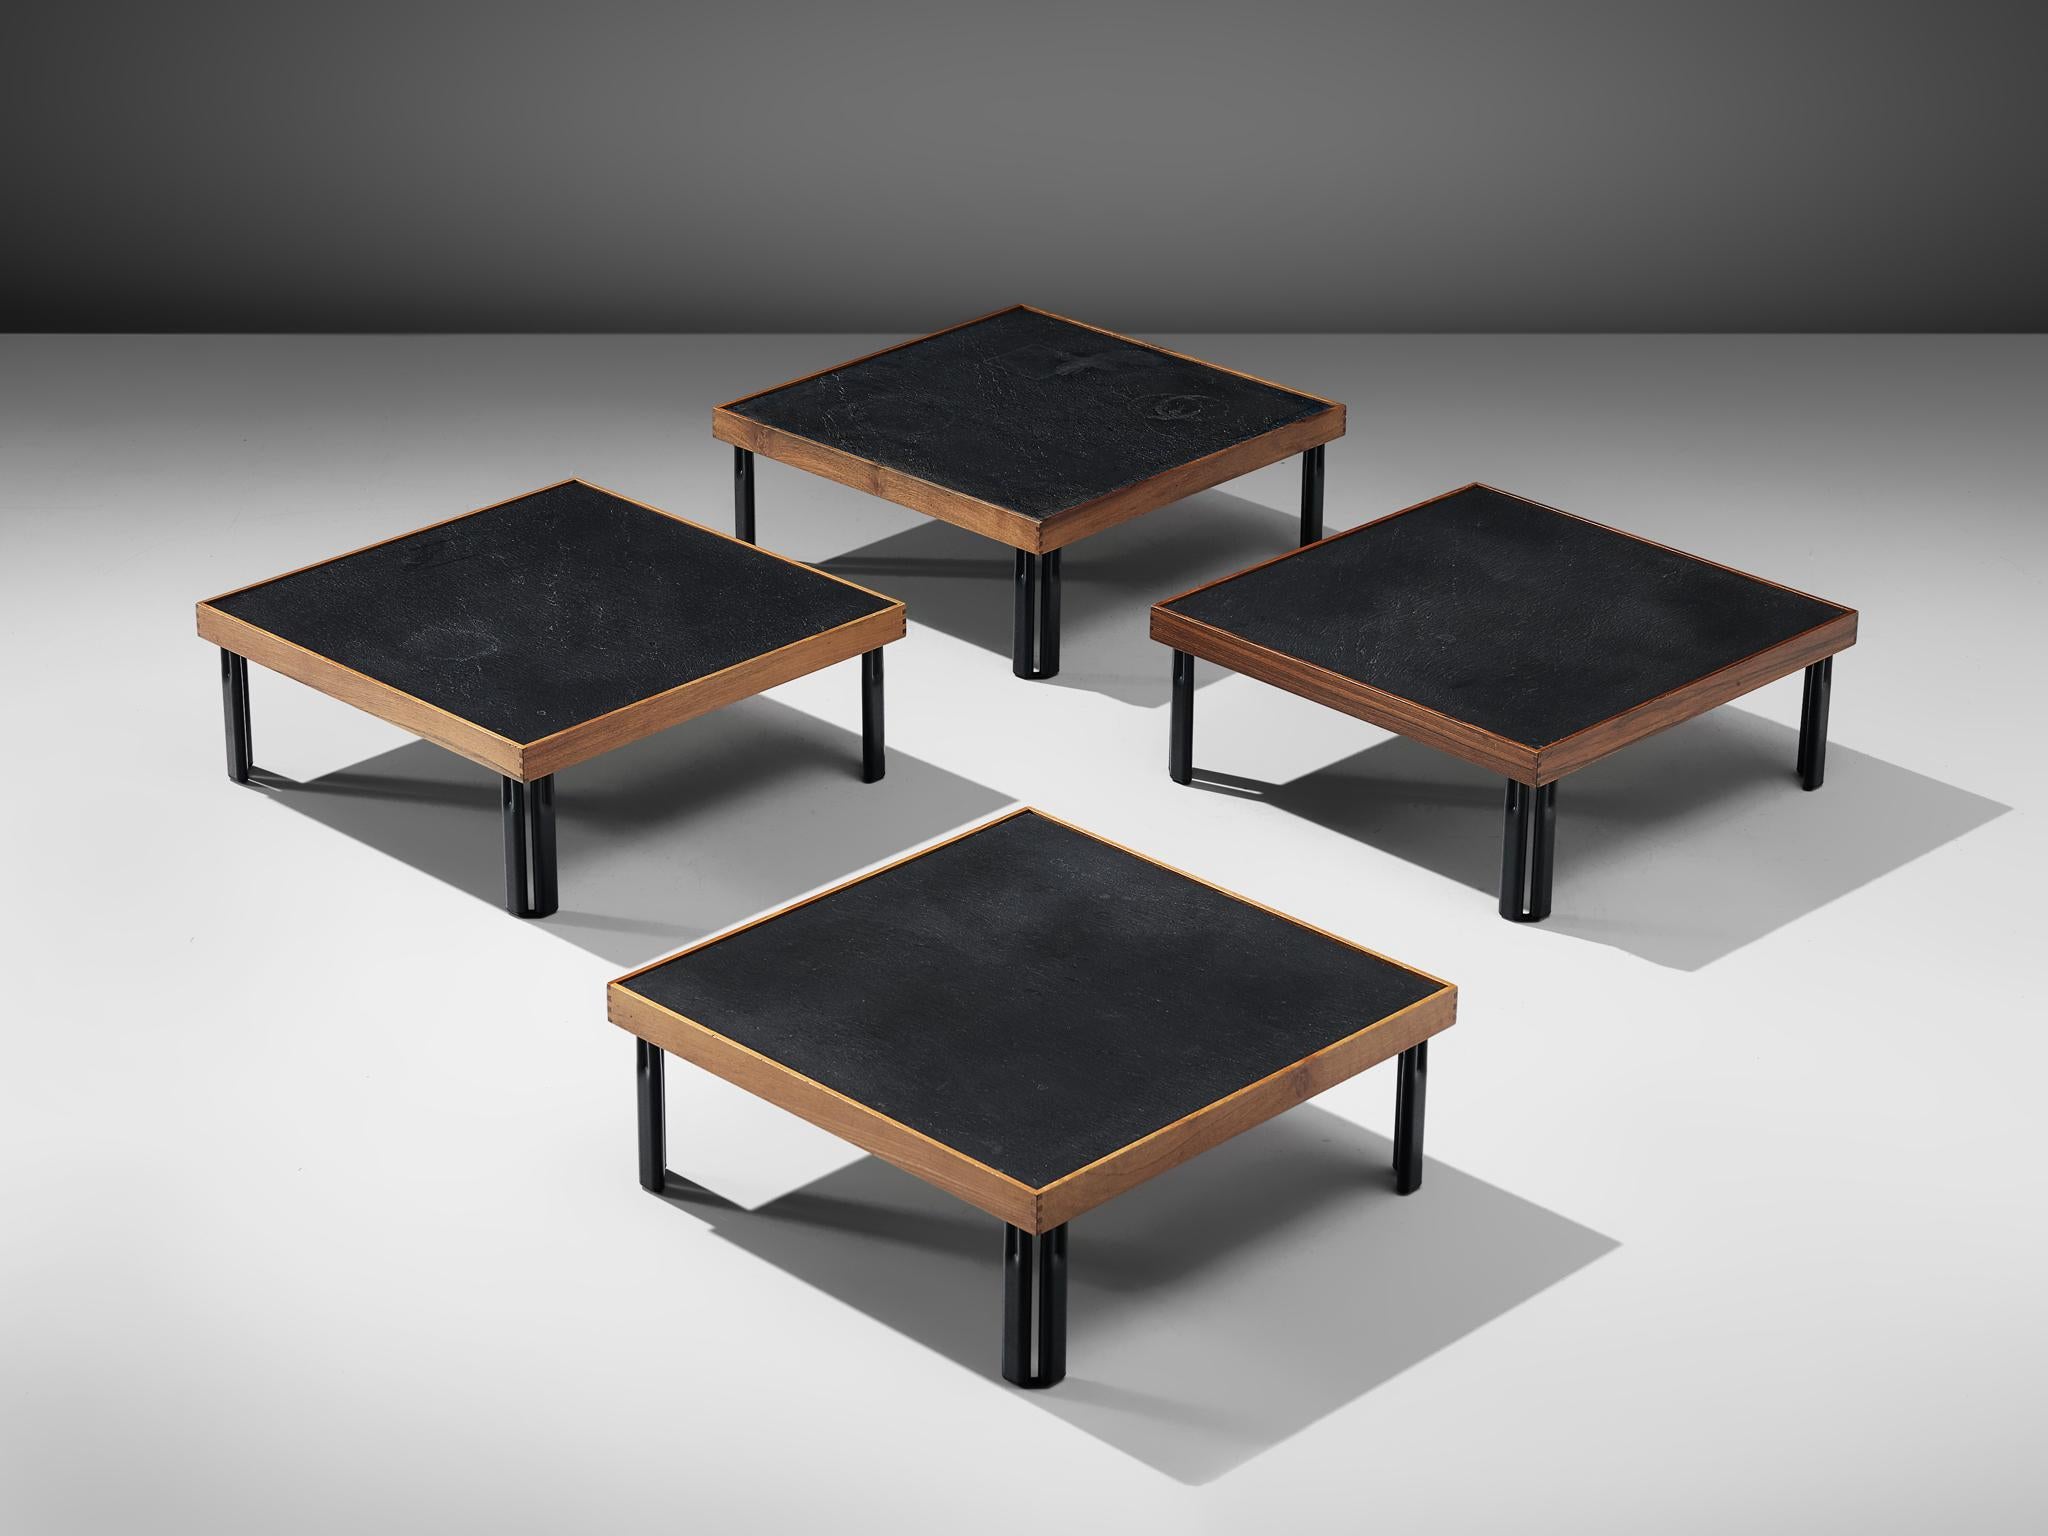 Piero De Martini for Cassina, set of four 'Naviglio' side tables, walnut, slate and metal, Italy, 1980s

A set of four small coffee tables, designed by Piero De Martini for Cassina. The low tables feature slate table tops, framed by edges in walnut.